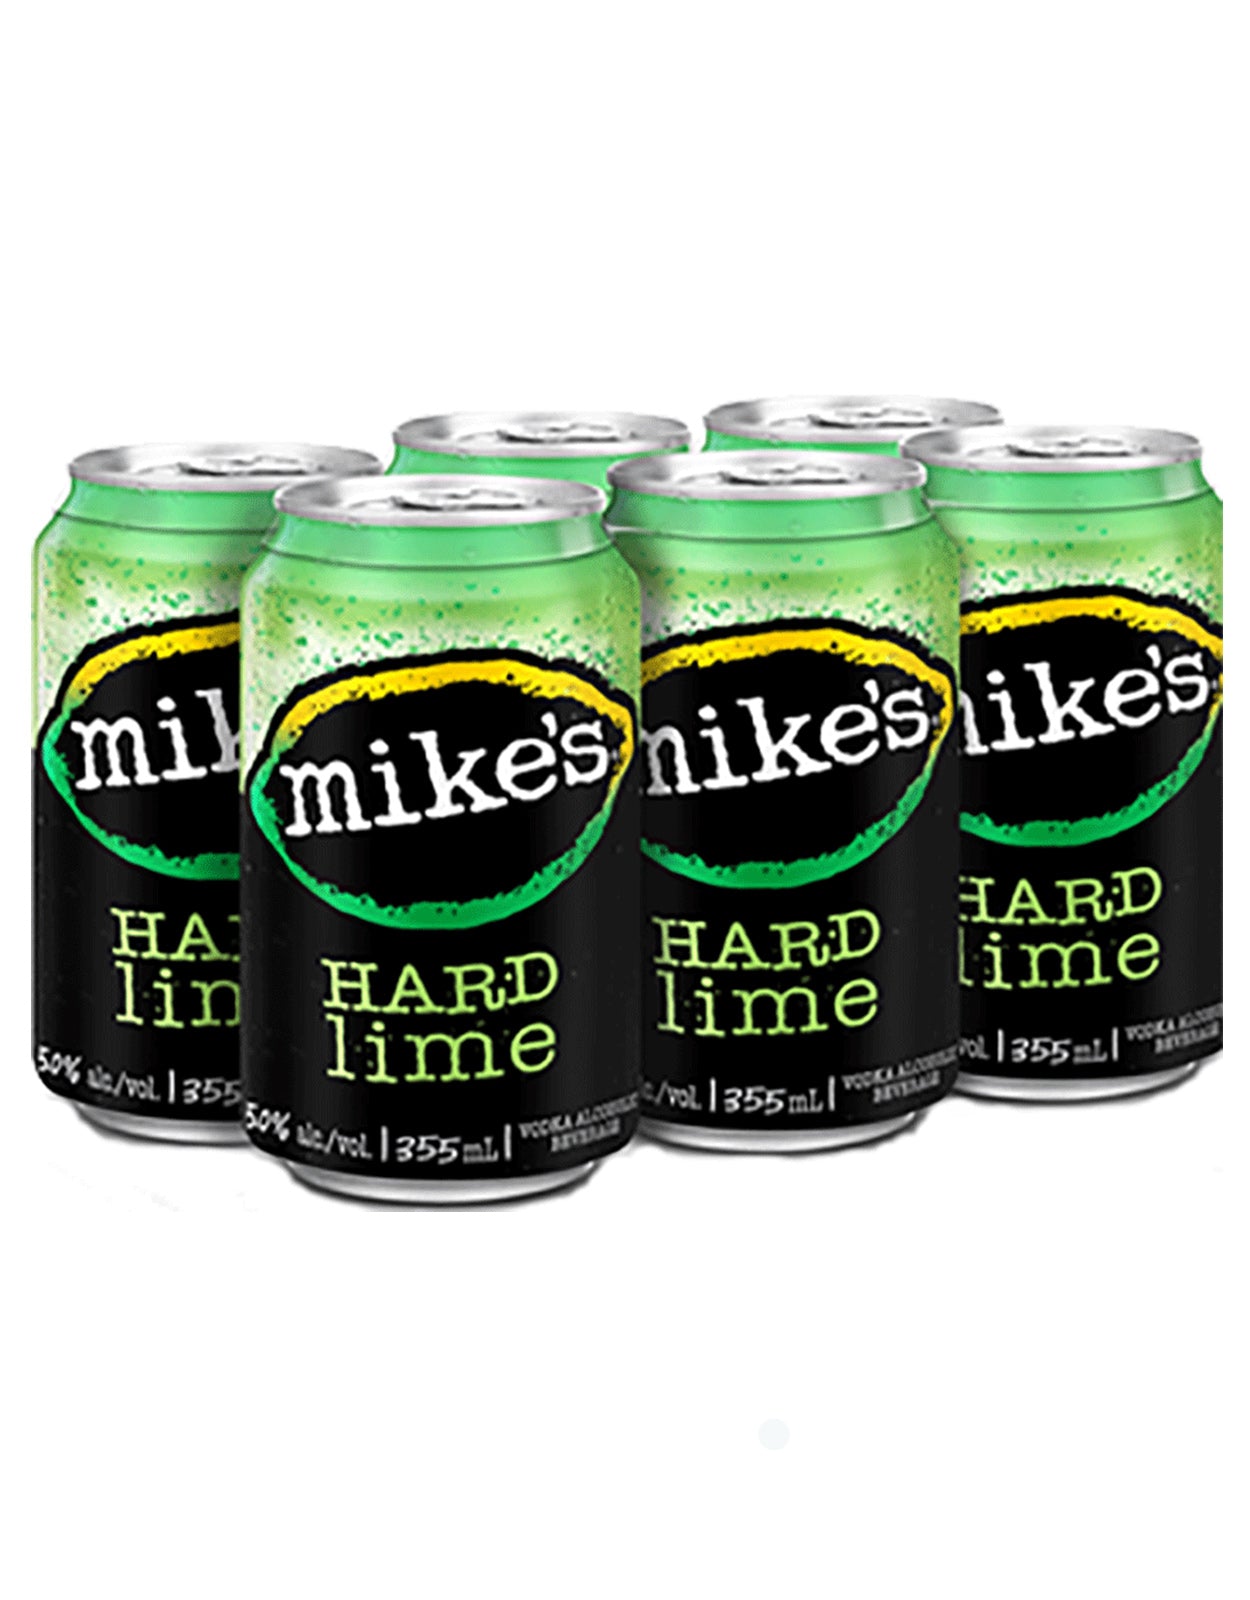 Mike's Hard Lime - 6 Cans